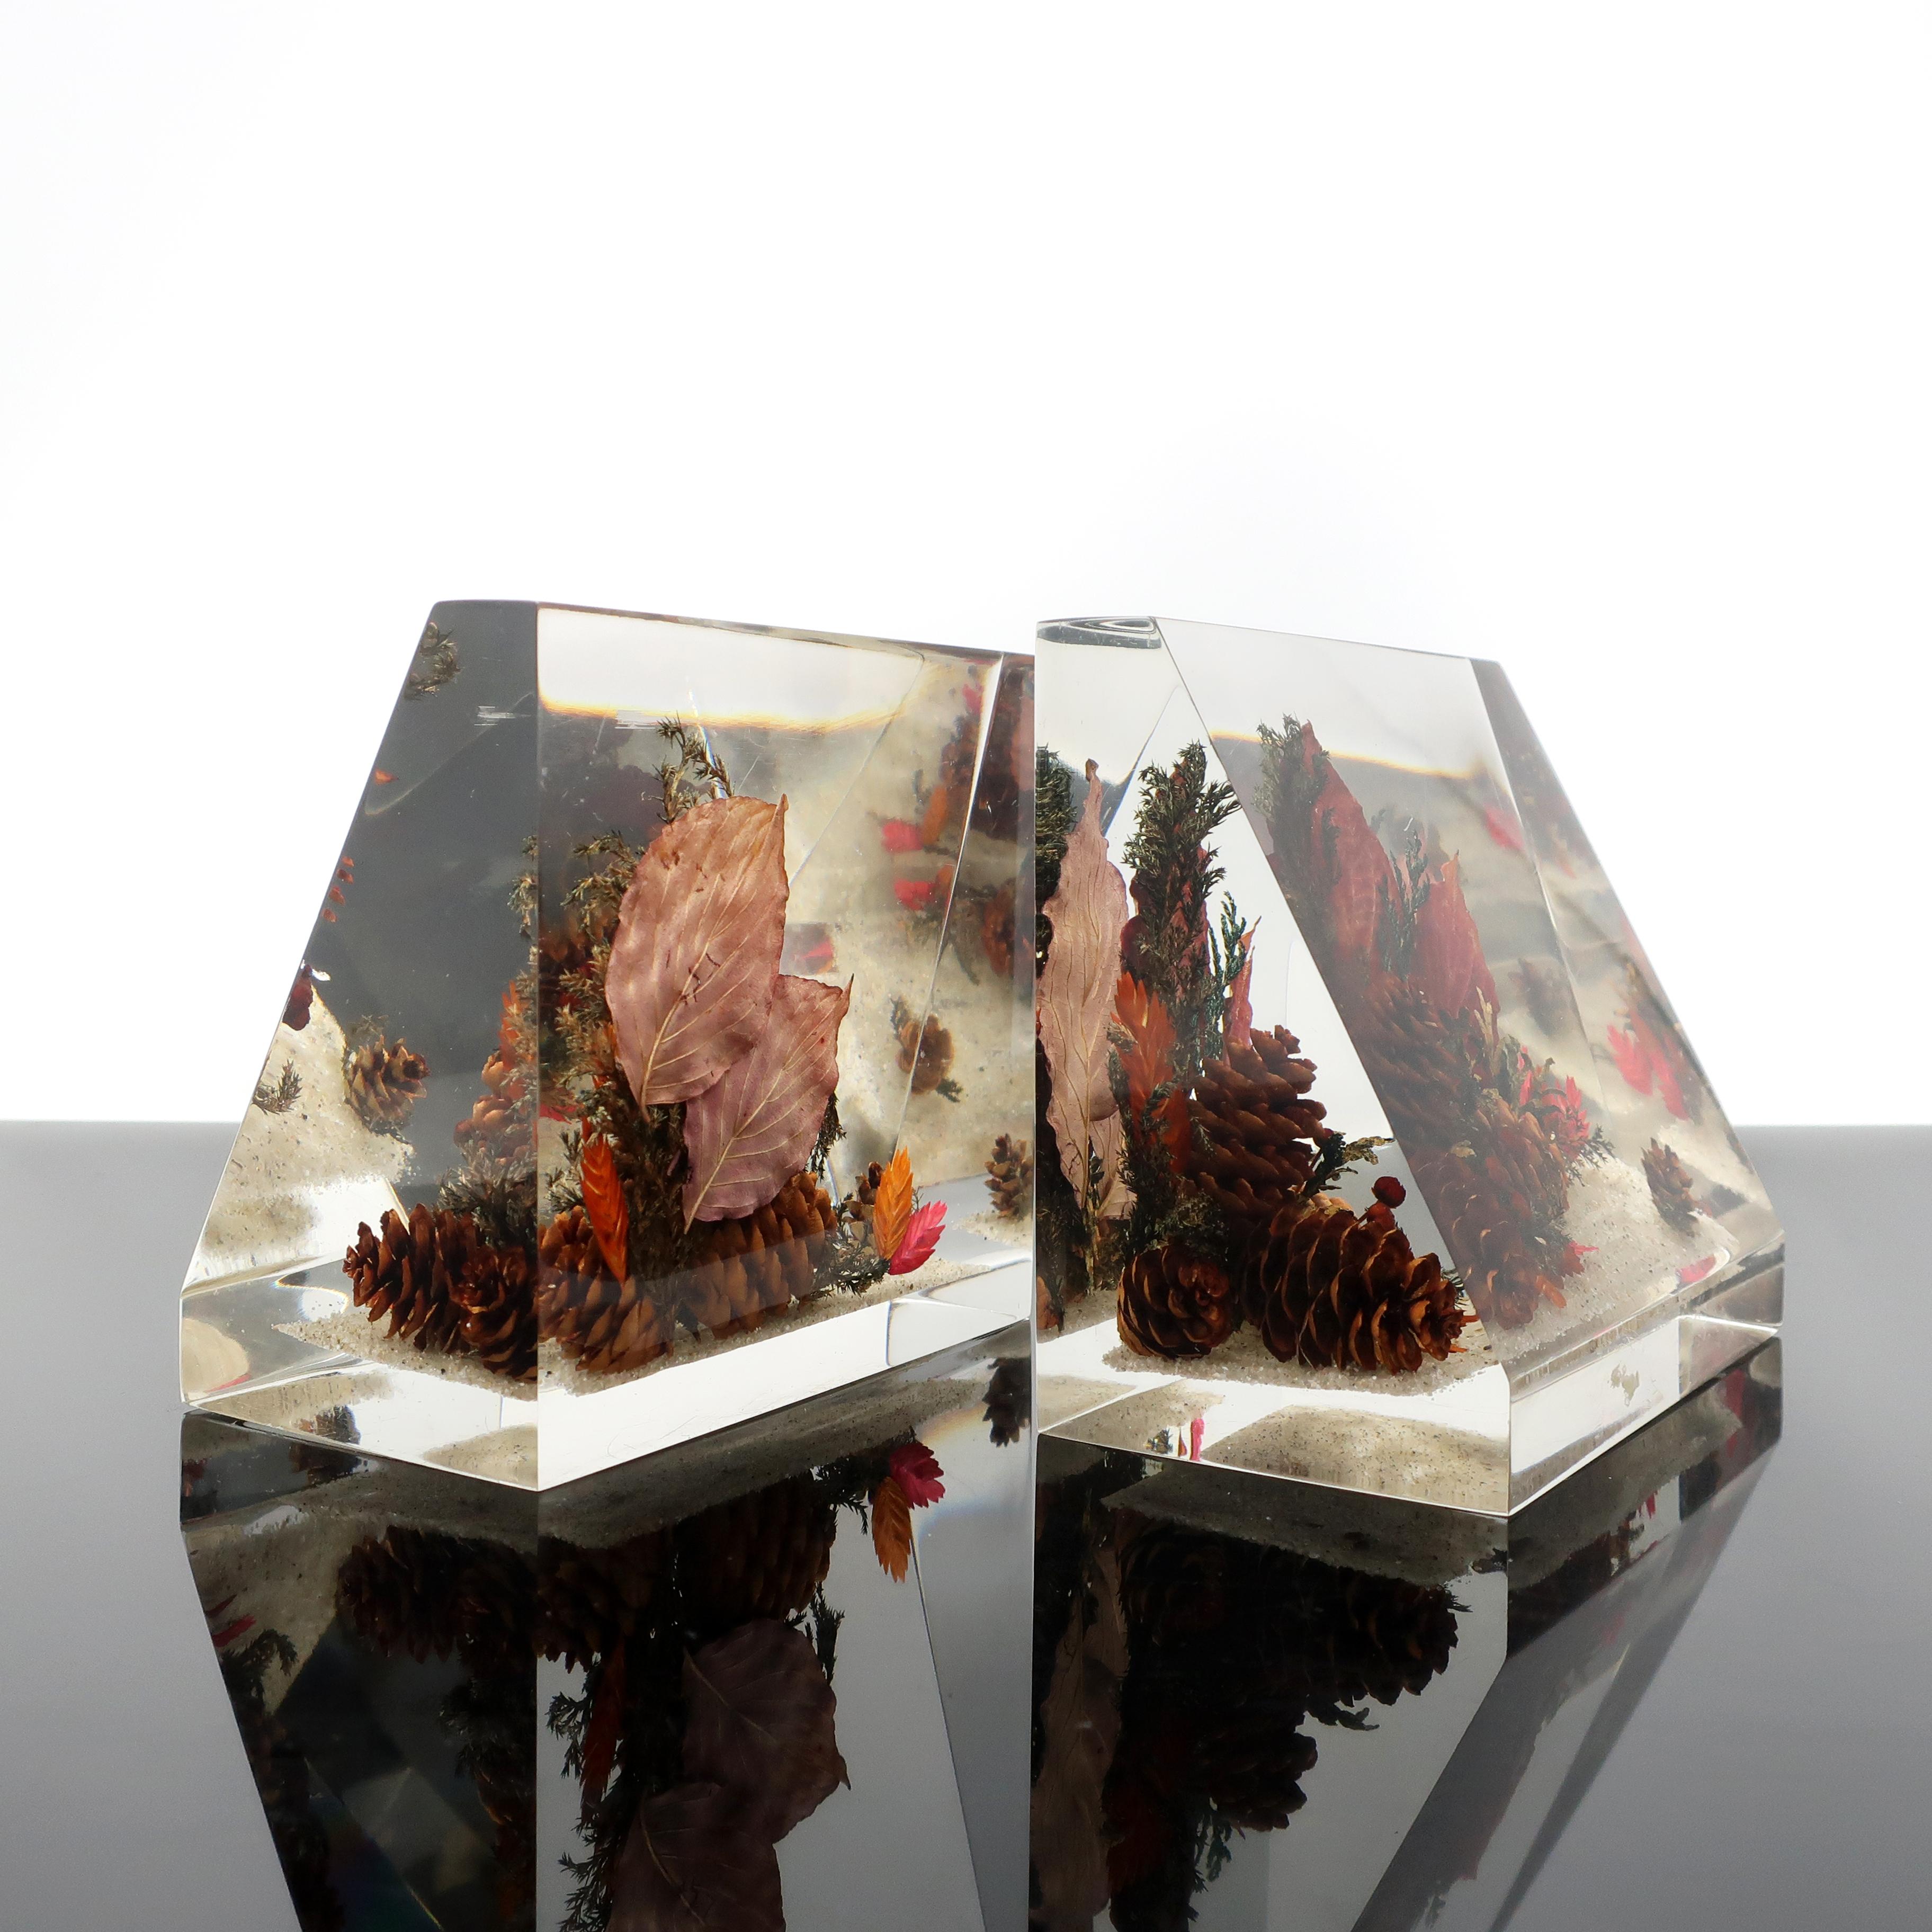 A pair of Lucite Clearfloat bookends with an autumn scene suspended in them. Pine cones, red leaves, and other autumn foliage on a layer of sand give this a brightness and feeling of texture contained within their sleek acrylic exterior.

In